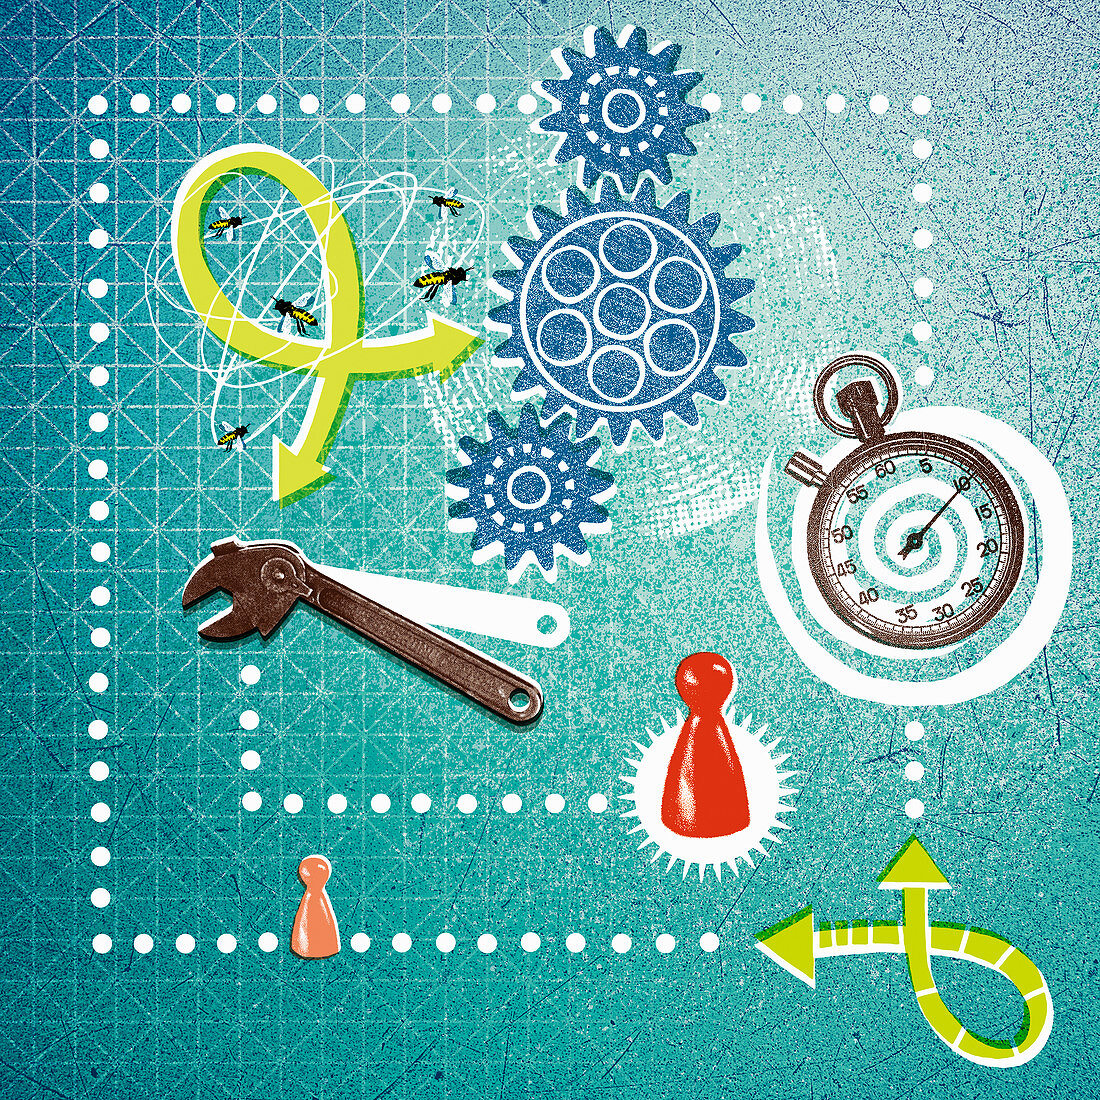 Game pieces, stopwatch and busy bees, illustration